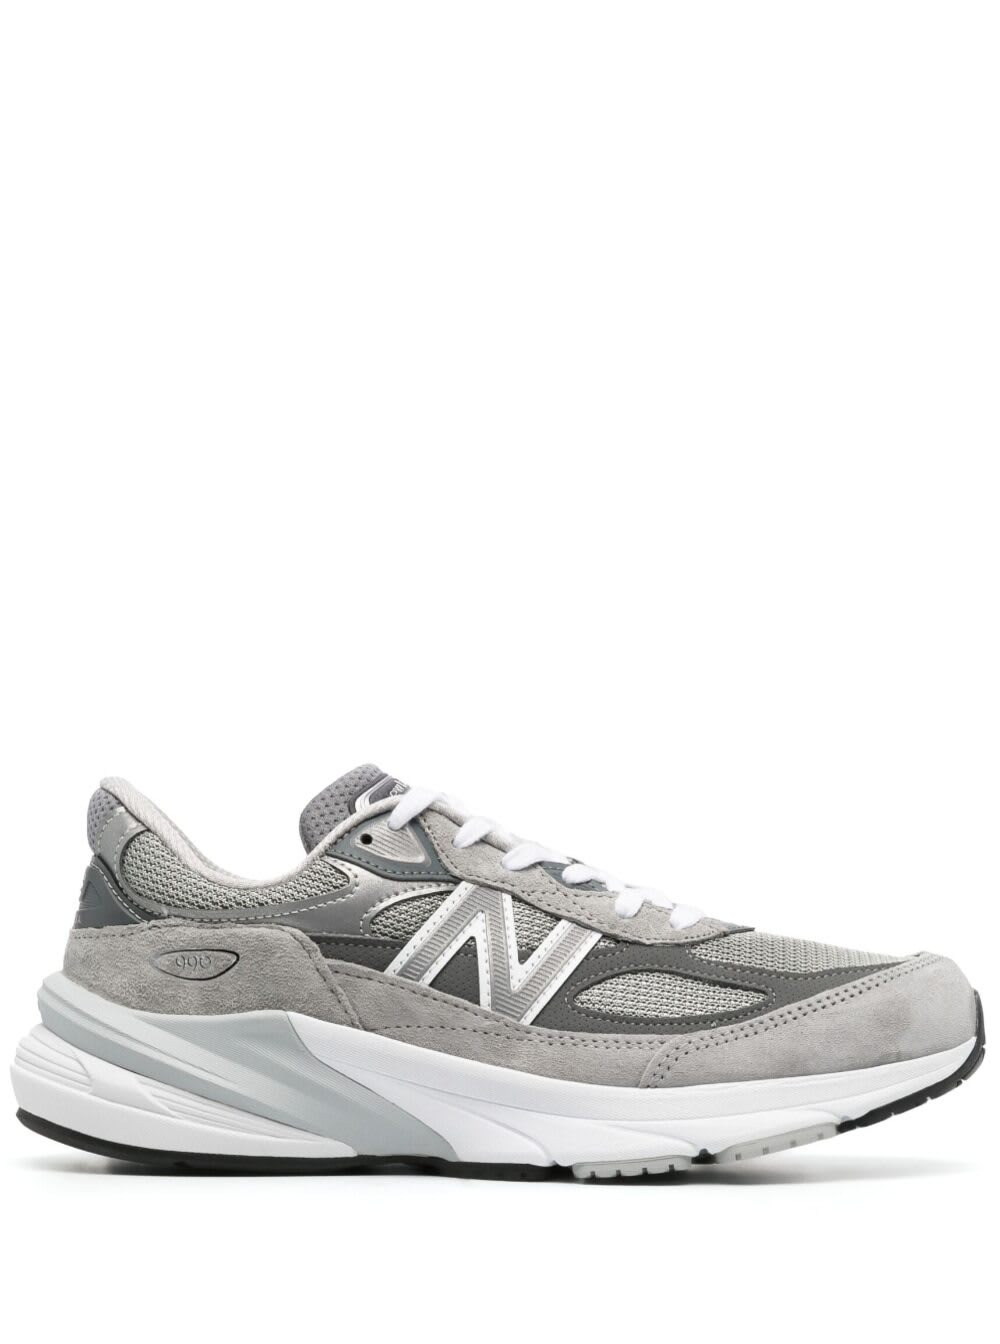 New Balance 990 V6 Grey Low Top Sneakers With Logo Details In Tech Materials Woman